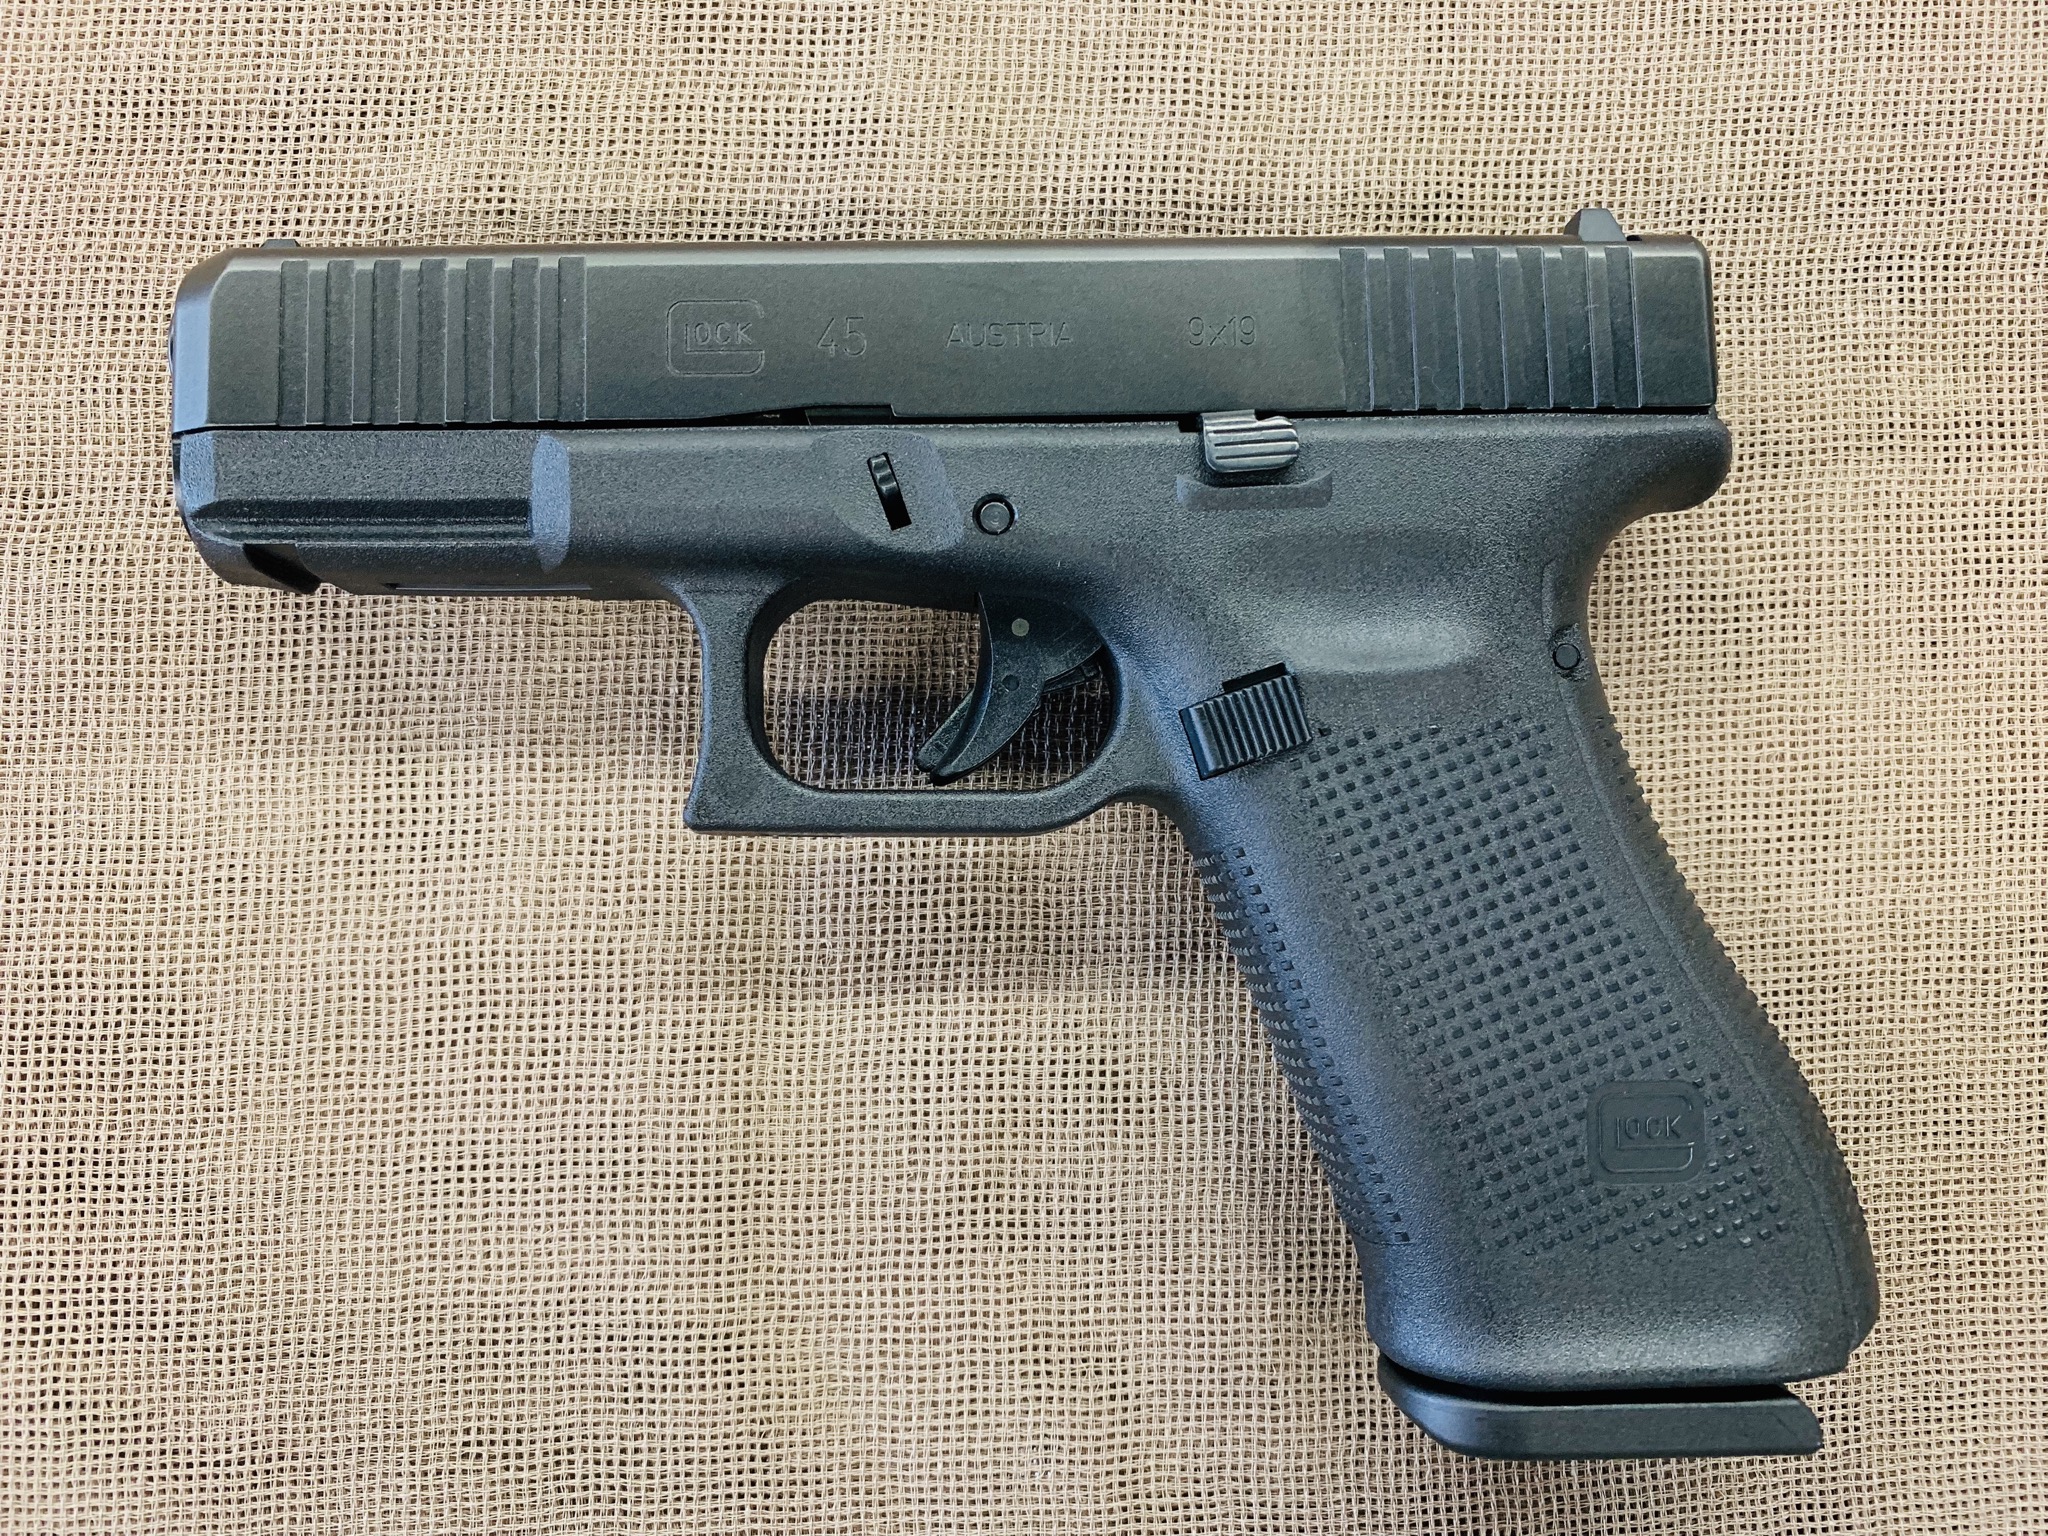 New! Glock Model 45 9mm auto 17+1 capacity with front 